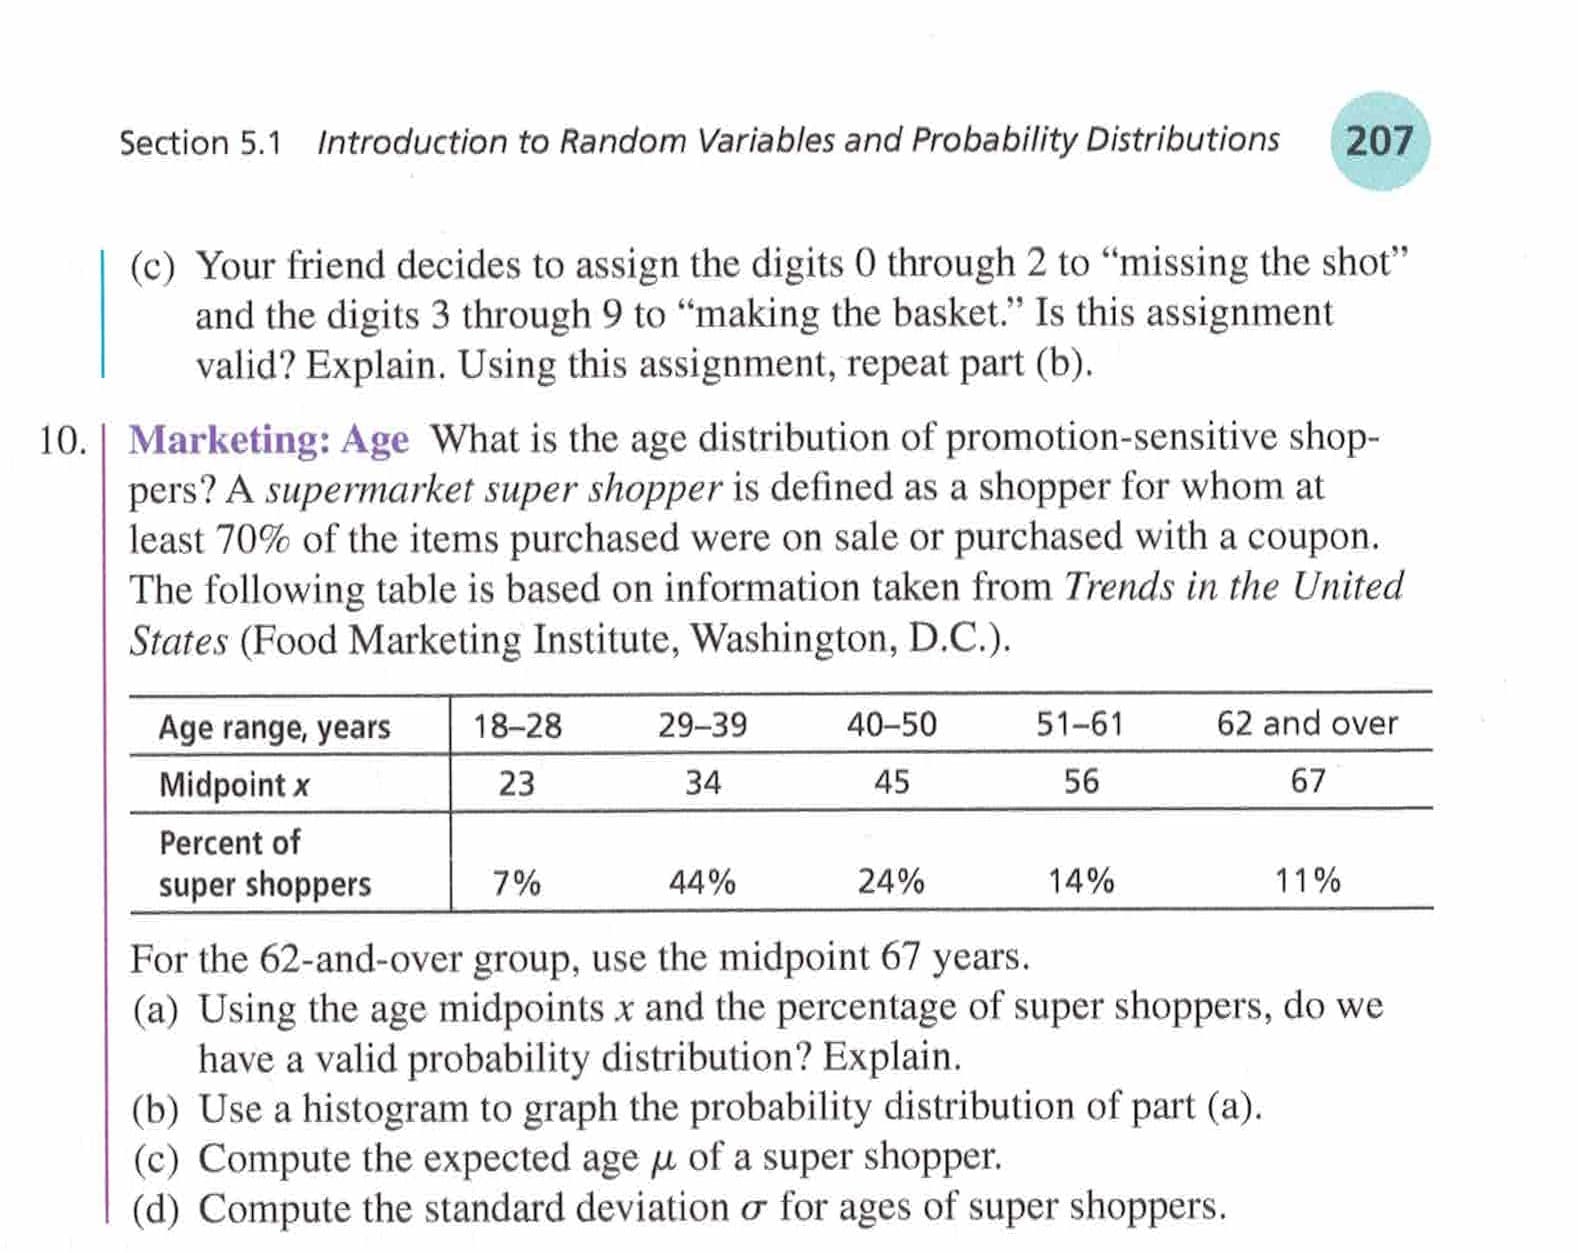 Introduction to Random Variables and Probability Distributions
207
Section 5.1
(c) Your friend decides to assign the digits 0 through 2 to "missing the shot"
and the digits 3 through 9 to "making the basket." Is this assignment
valid? Explain. Using this assignment, repeat part (b).
10. | Marketing: Age What is the age distribution of promotion-sensitive shop-
pers? A supermarket super shopper is defined as a shopper for whom at
least 70% of the items purchased were on sale or purchased with a coupon.
The following table is based on information taken from Trends in the United
States (Food Marketing Institute, Washington, D.C.).
51-61
62 and over
40-50
29-39
18-28
Age range, years
56
67
45
Midpoint x
23
34
Percent of
14%
11%
7%
44%
24%
super shoppers
For the 62-and-over group, use the midpoint 67 years.
(a) Using the age midpoints x and the percentage of super shoppers, do we
have a valid probability distribution? Explain.
(b) Use a histogram to graph the probability distribution of part (a).
(c) Compute the expected age u of a super shopper.
(d) Compute the standard deviation o for ages of super shoppers.
